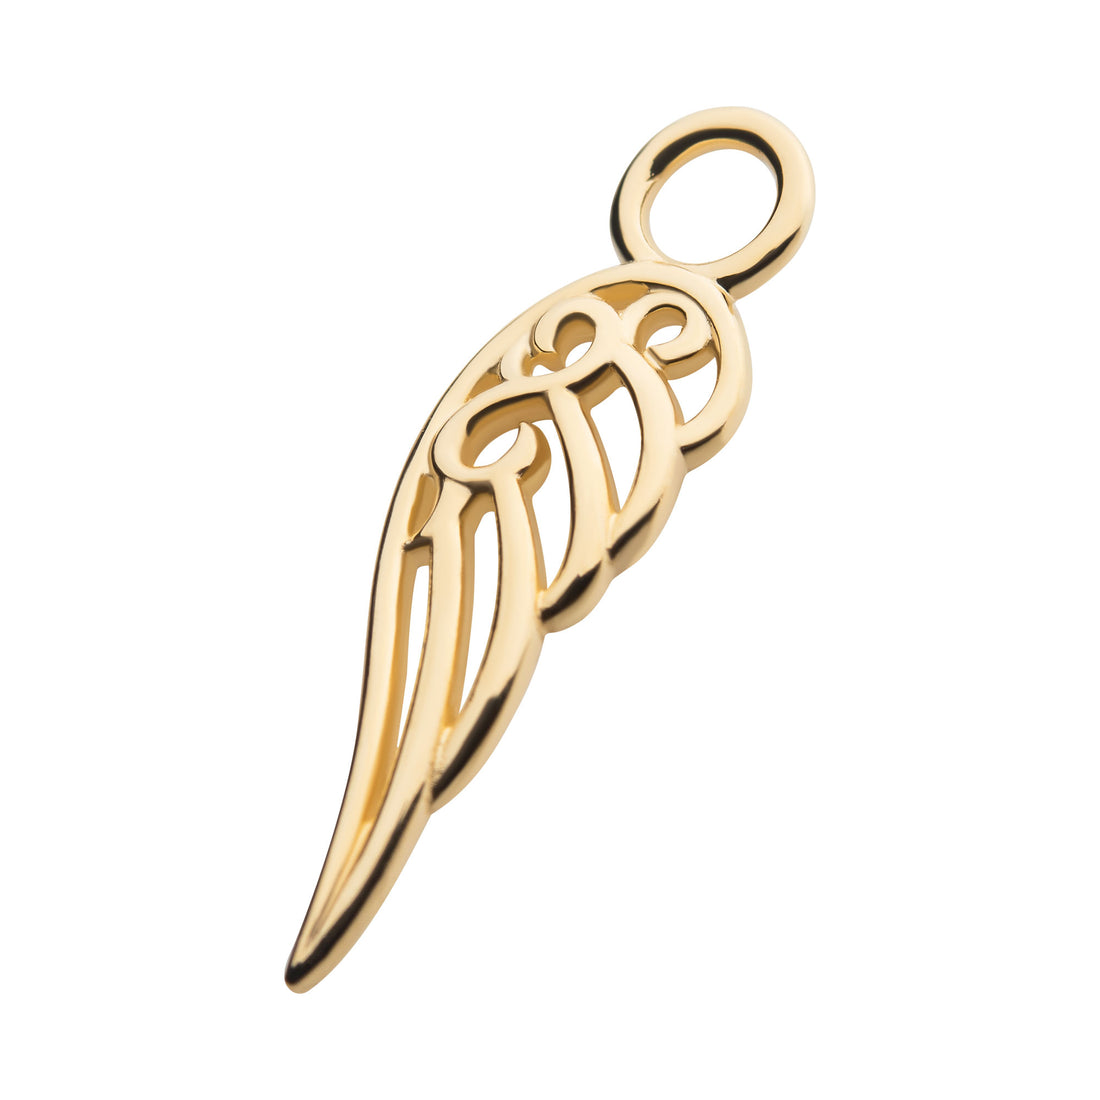 14Kt Yellow Gold Wing Charm